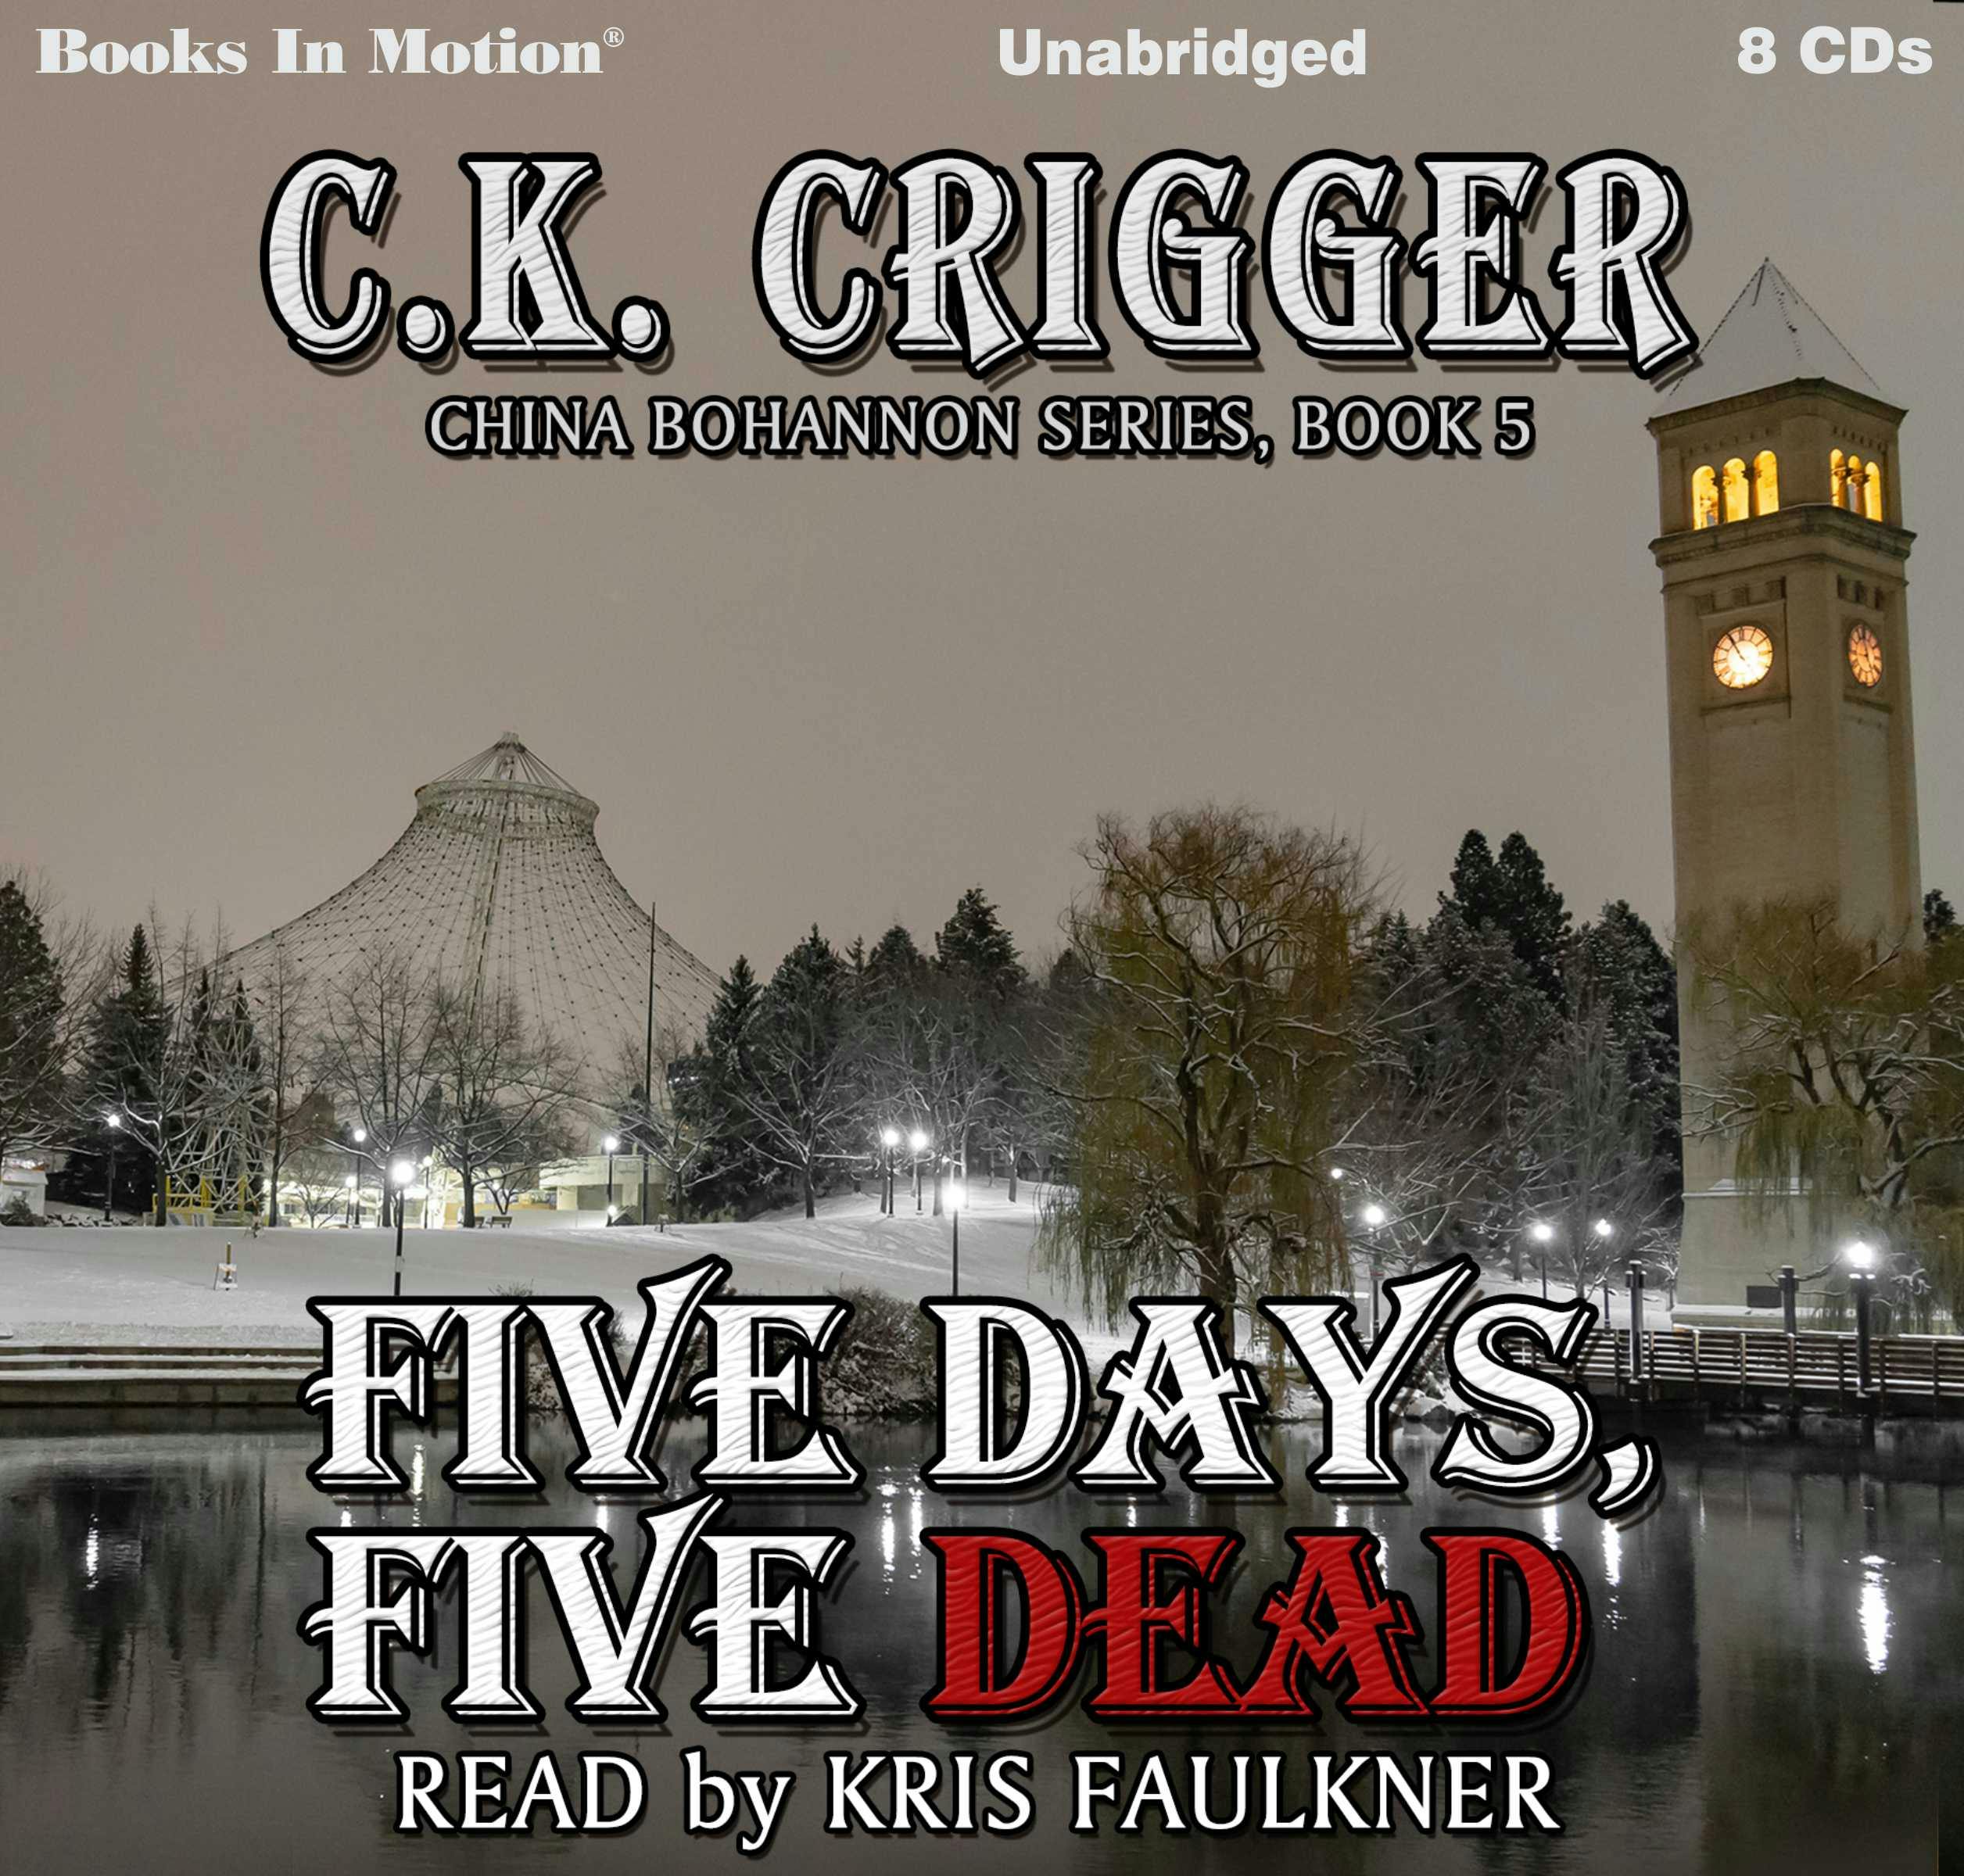 Five Days, Five Dead: The China Bohannon Series, Book 5 - C.K. Crigger